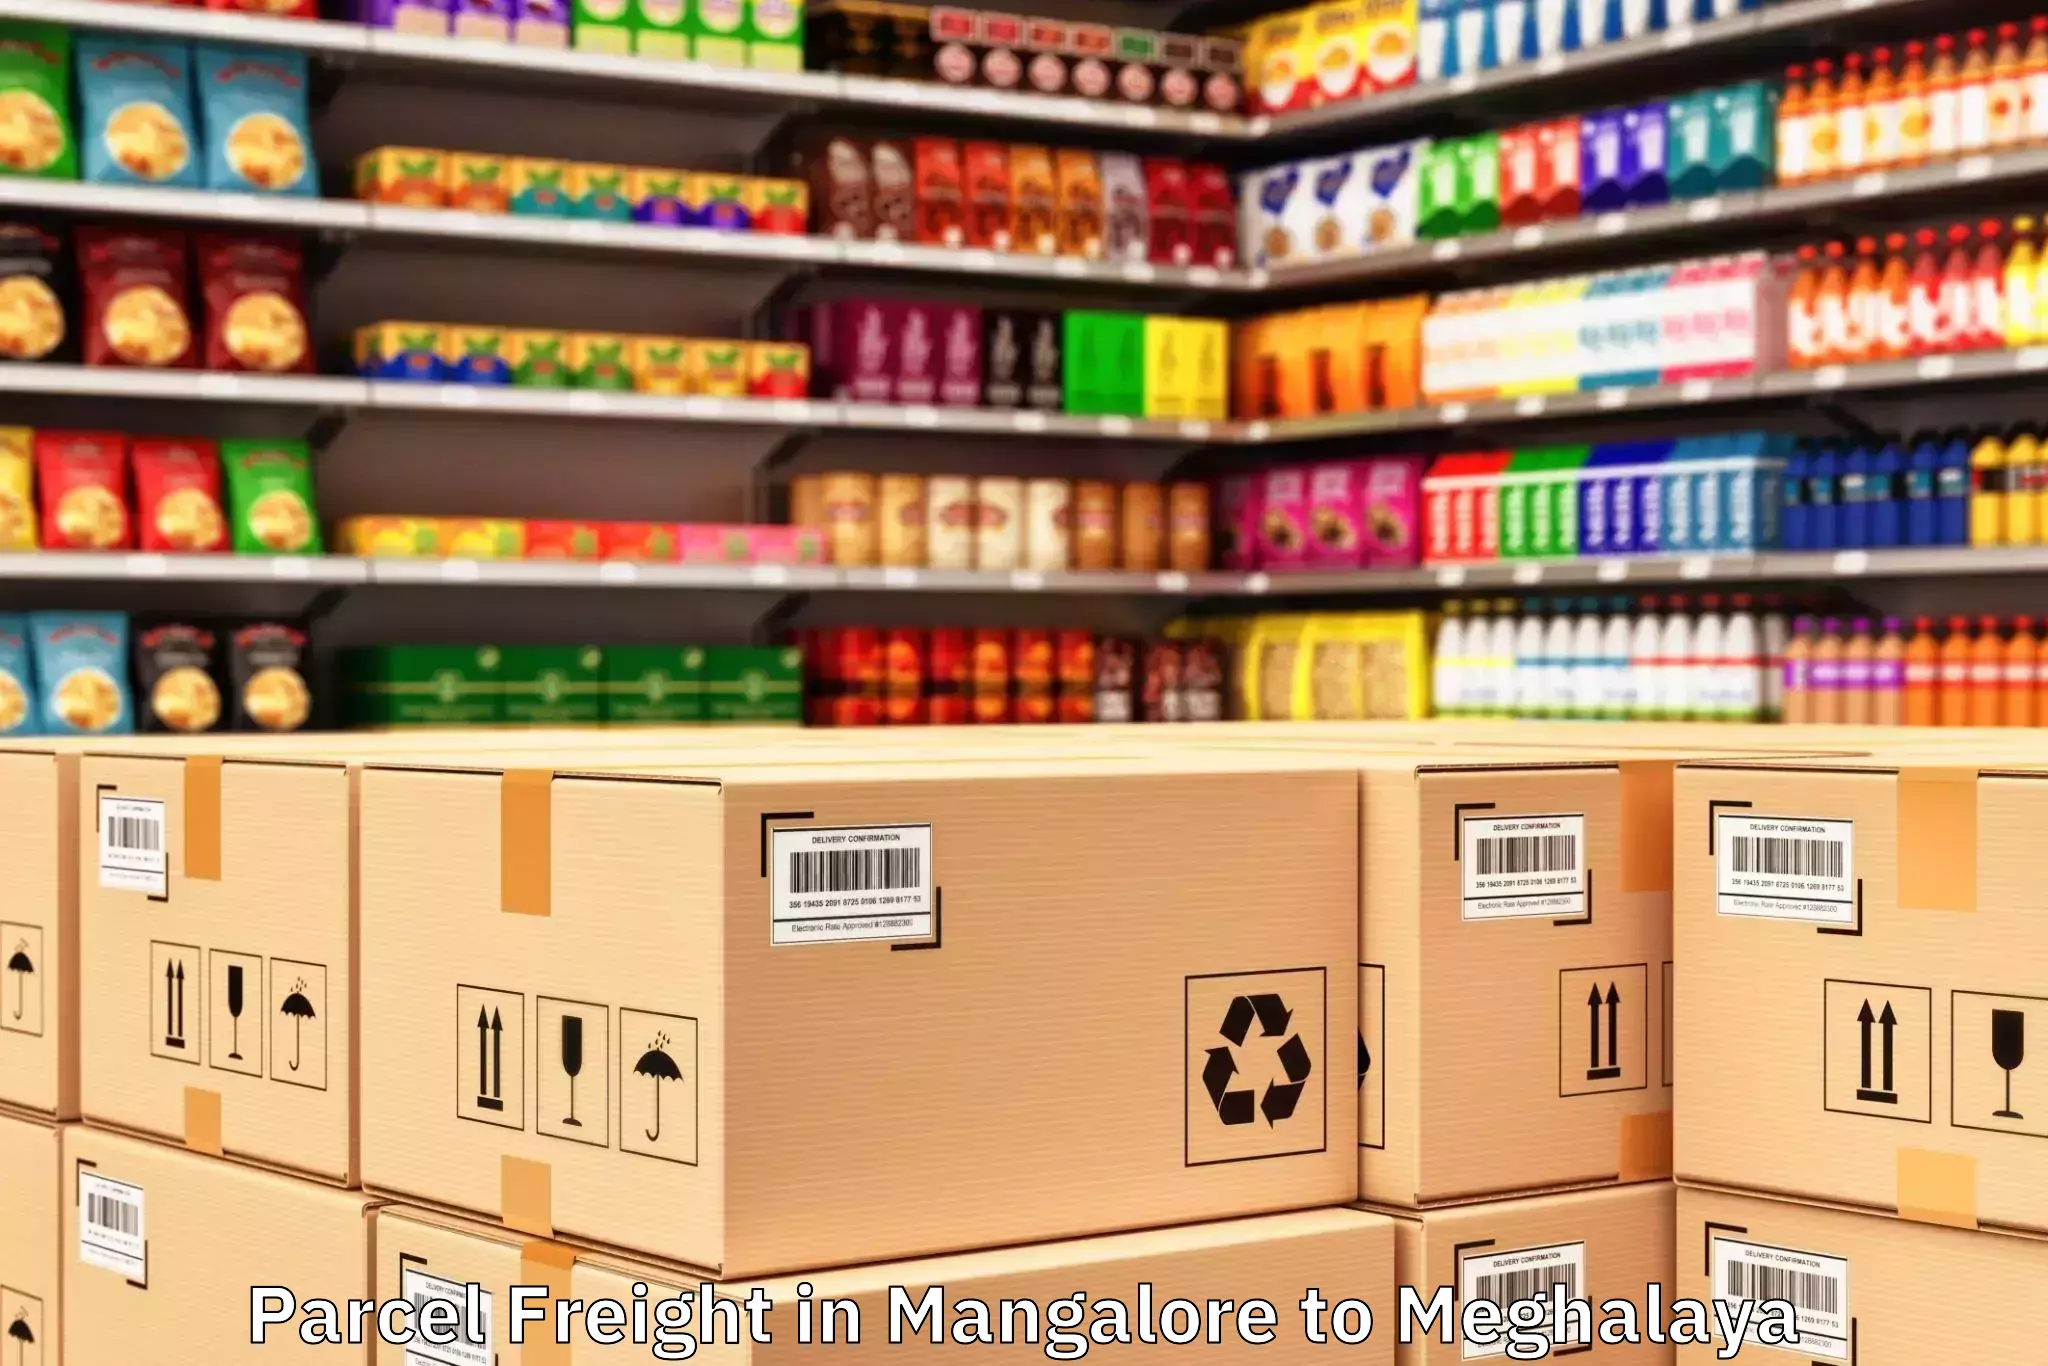 Top Mangalore to Meghalaya Parcel Freight Available